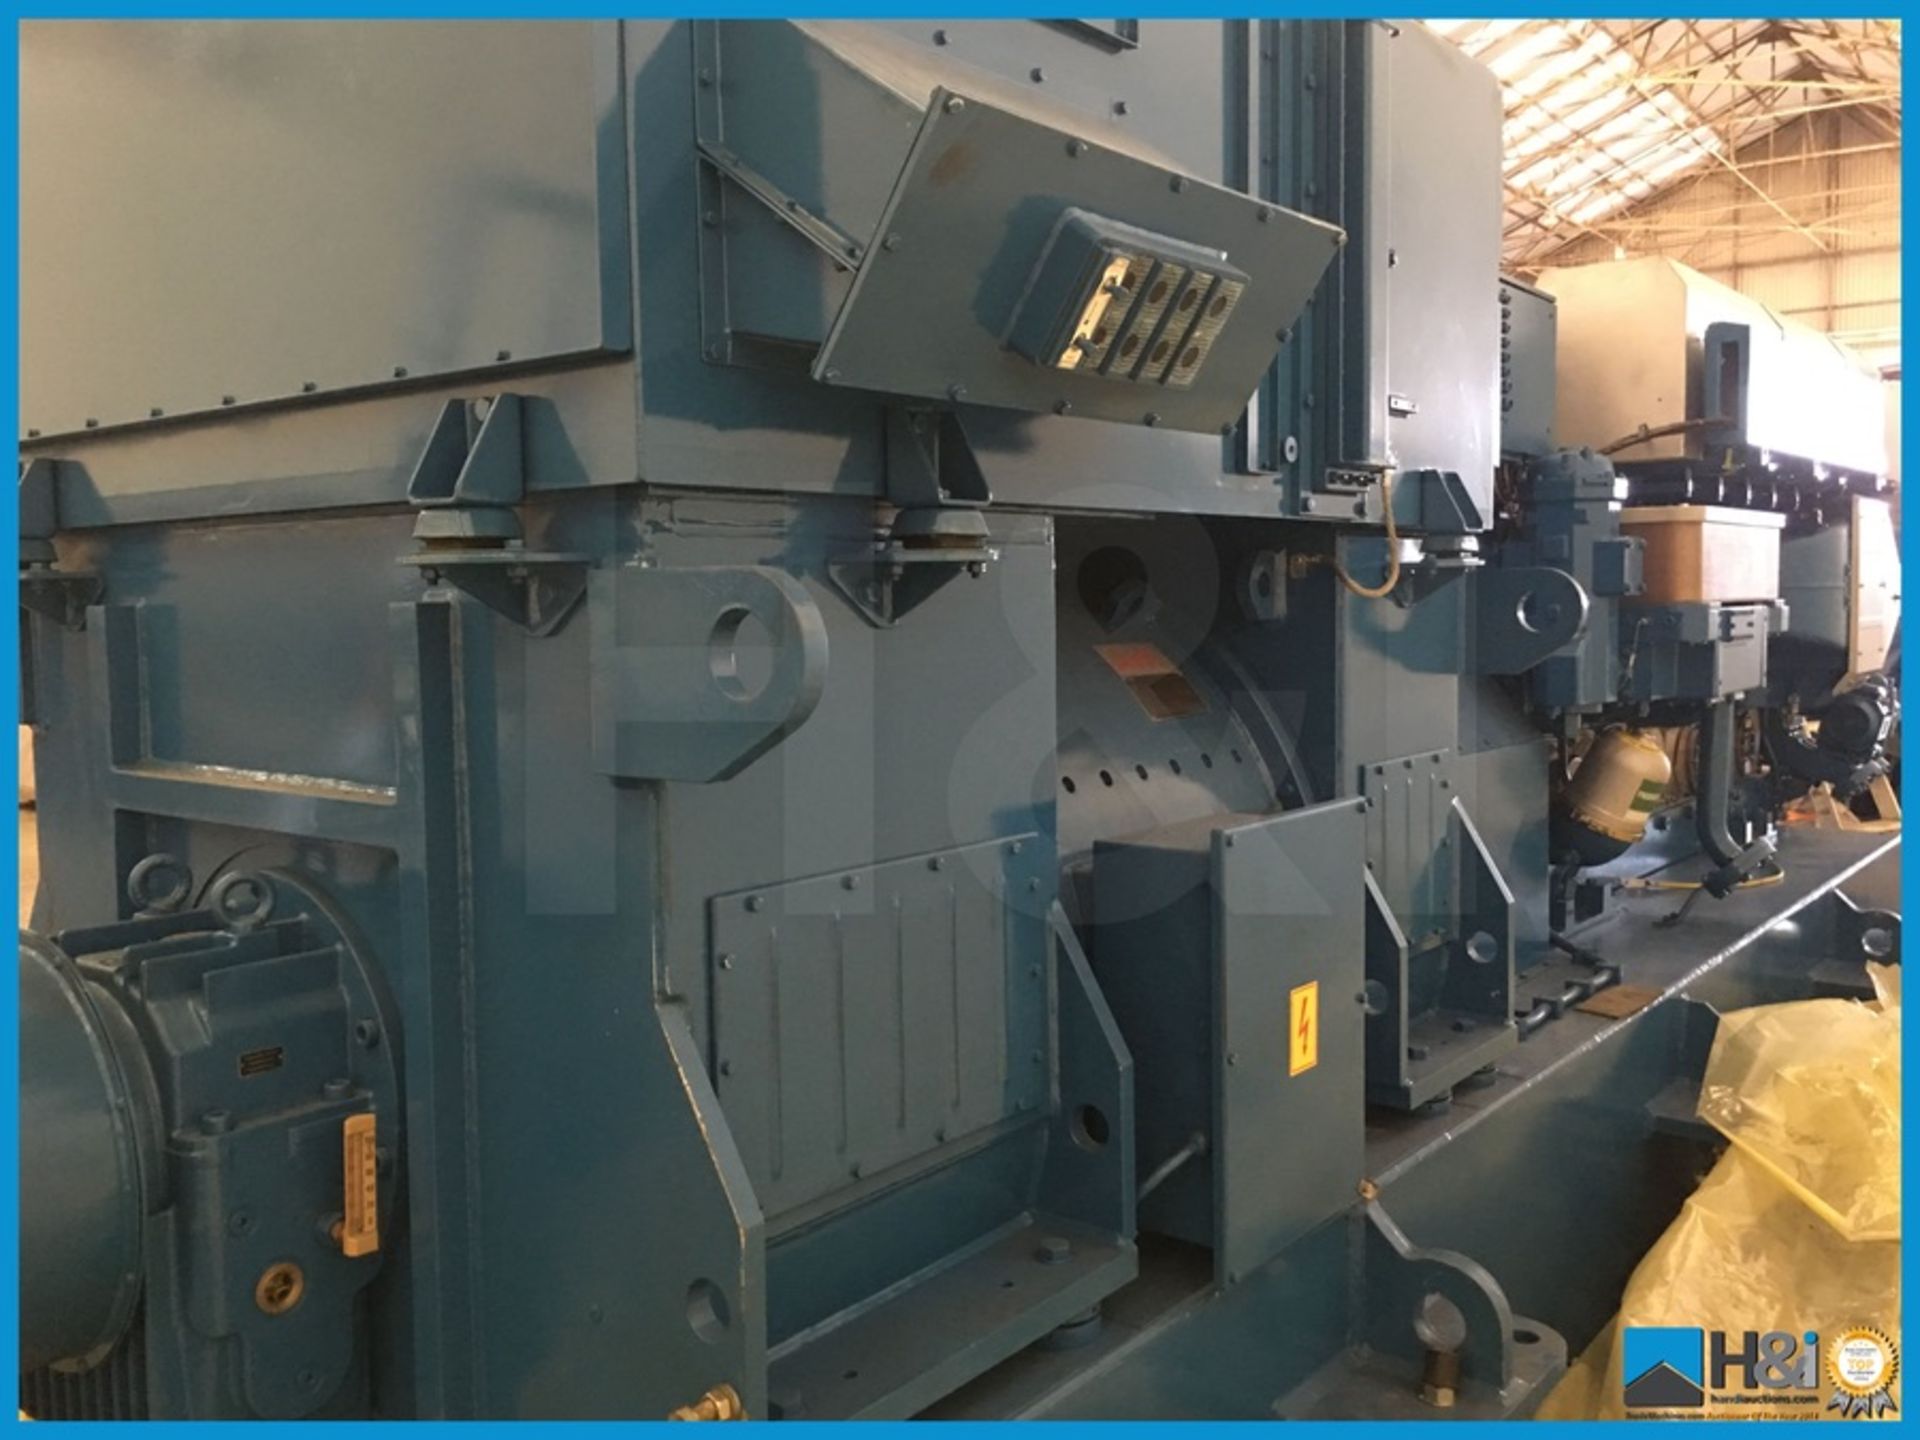 Unused Wartsila 8L20 high capacity diesel generator manufactured in 2013 for a large marine - Image 16 of 19